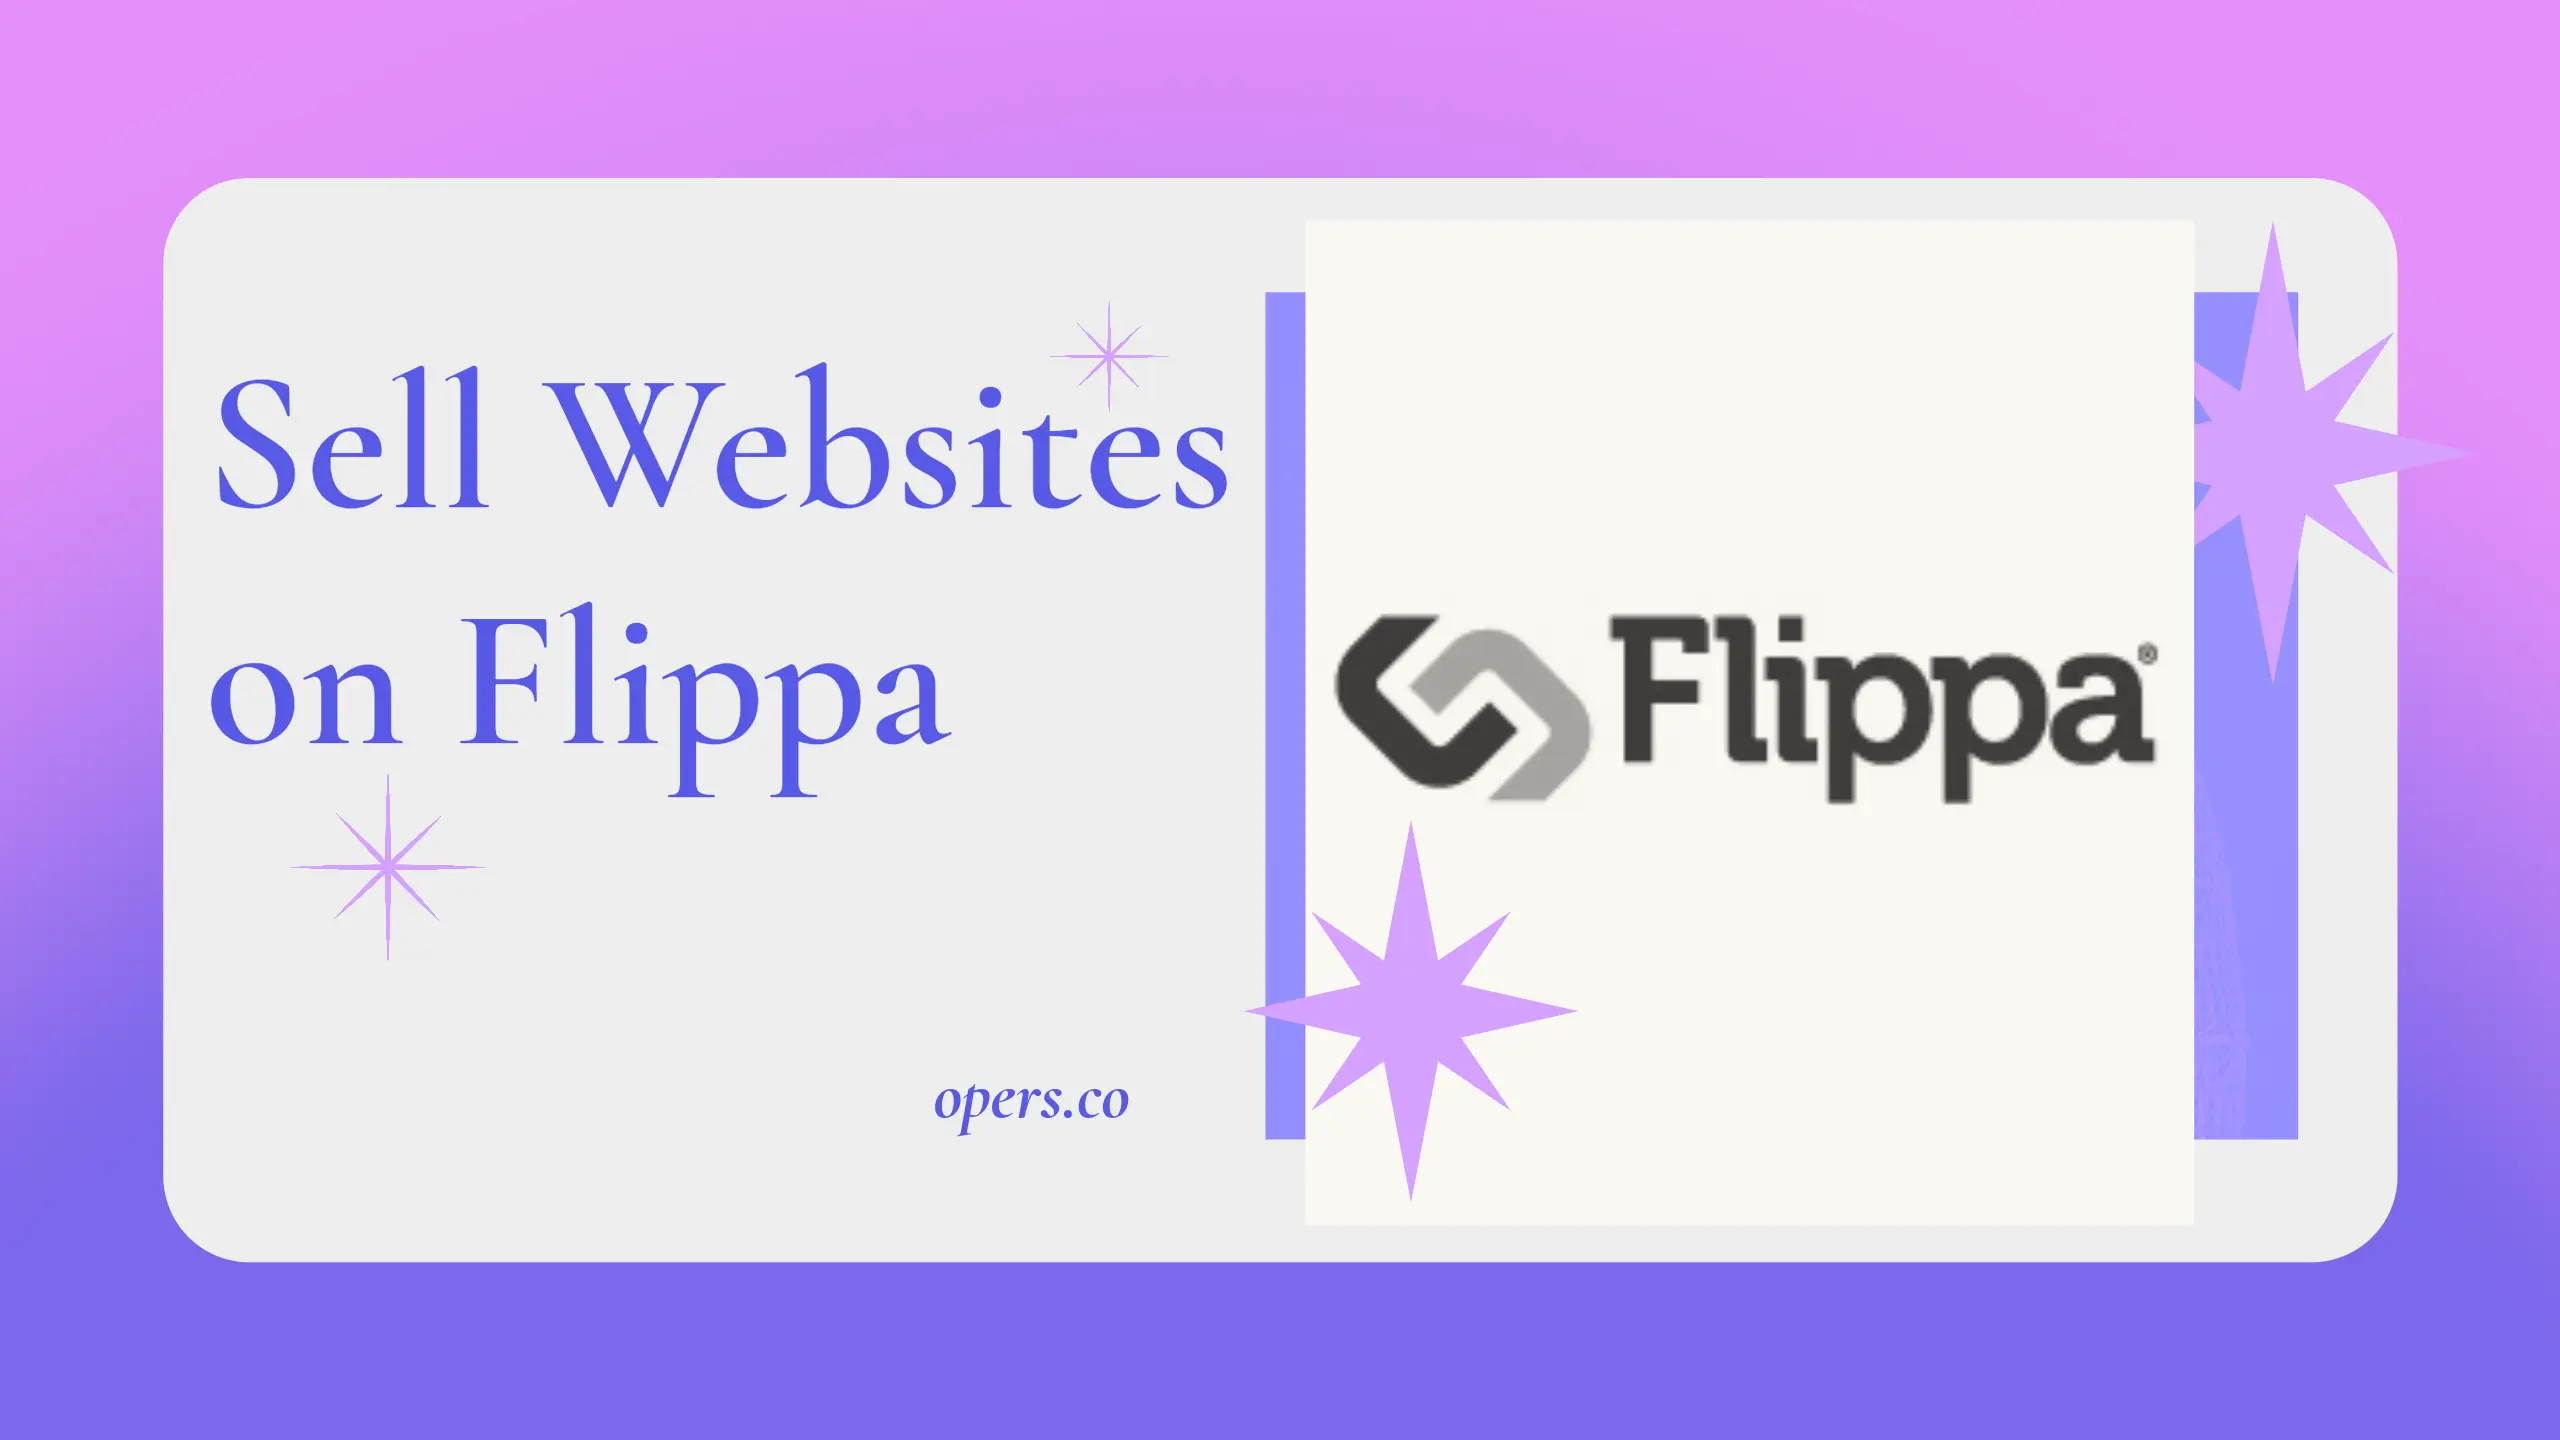 15 Tips for Making Money by Selling Websites on Flippa